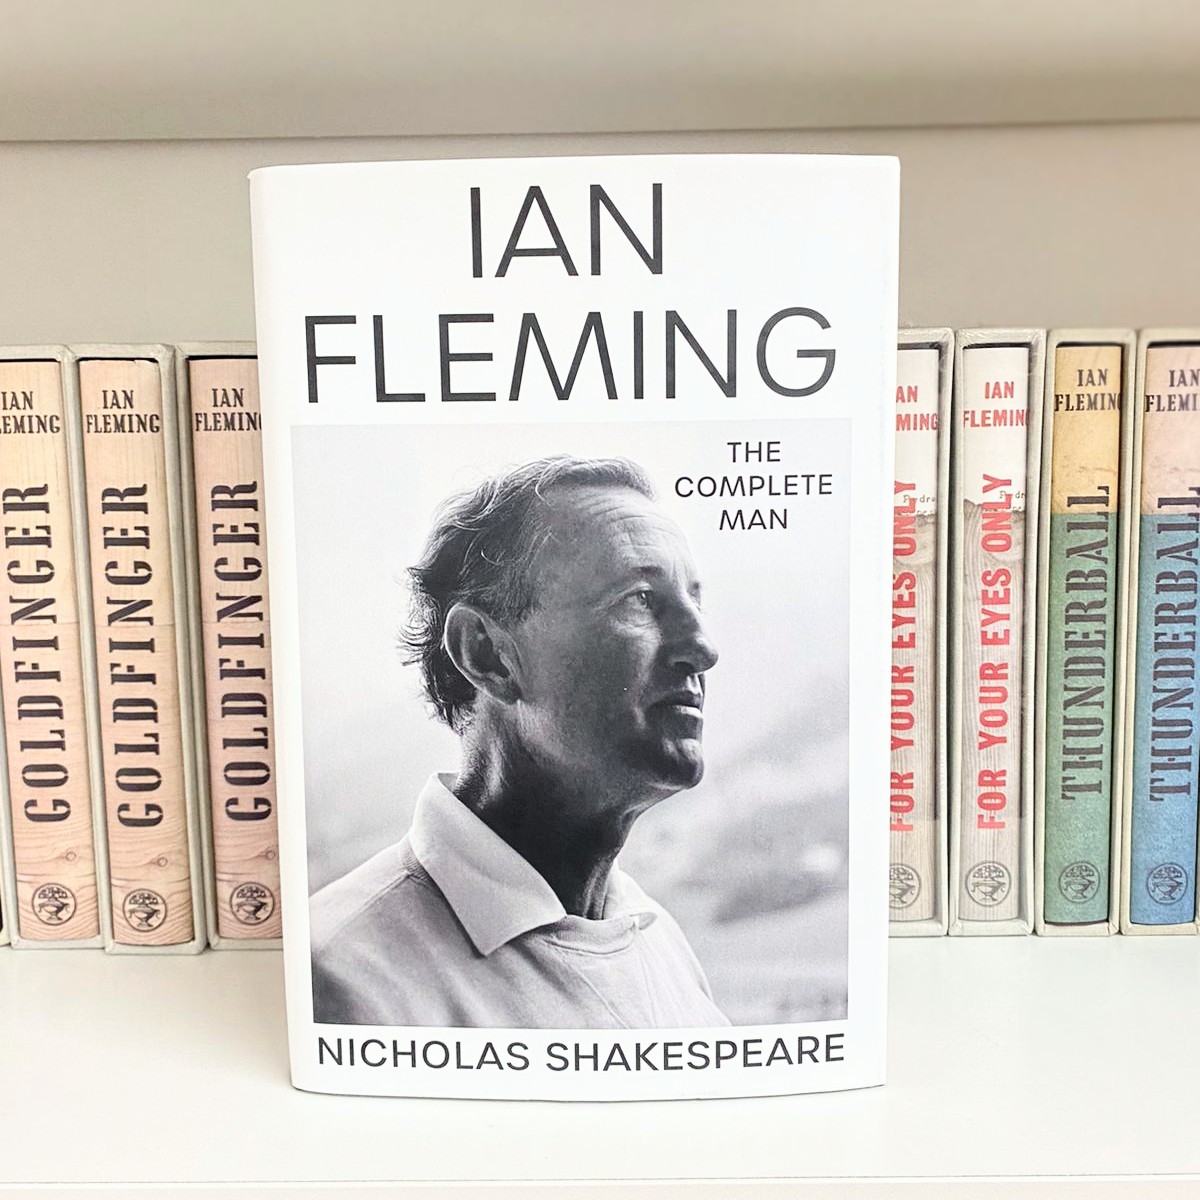 'Entire eras materialize in artful sketches while the portrait of Fleming acquires texture & shade with each trial & triumph.' - @WSJ @dolphinsands' Ian Fleming: The Complete Man is out now in the US! You can read the full WSJ review here: wsj.com/arts-culture/b…